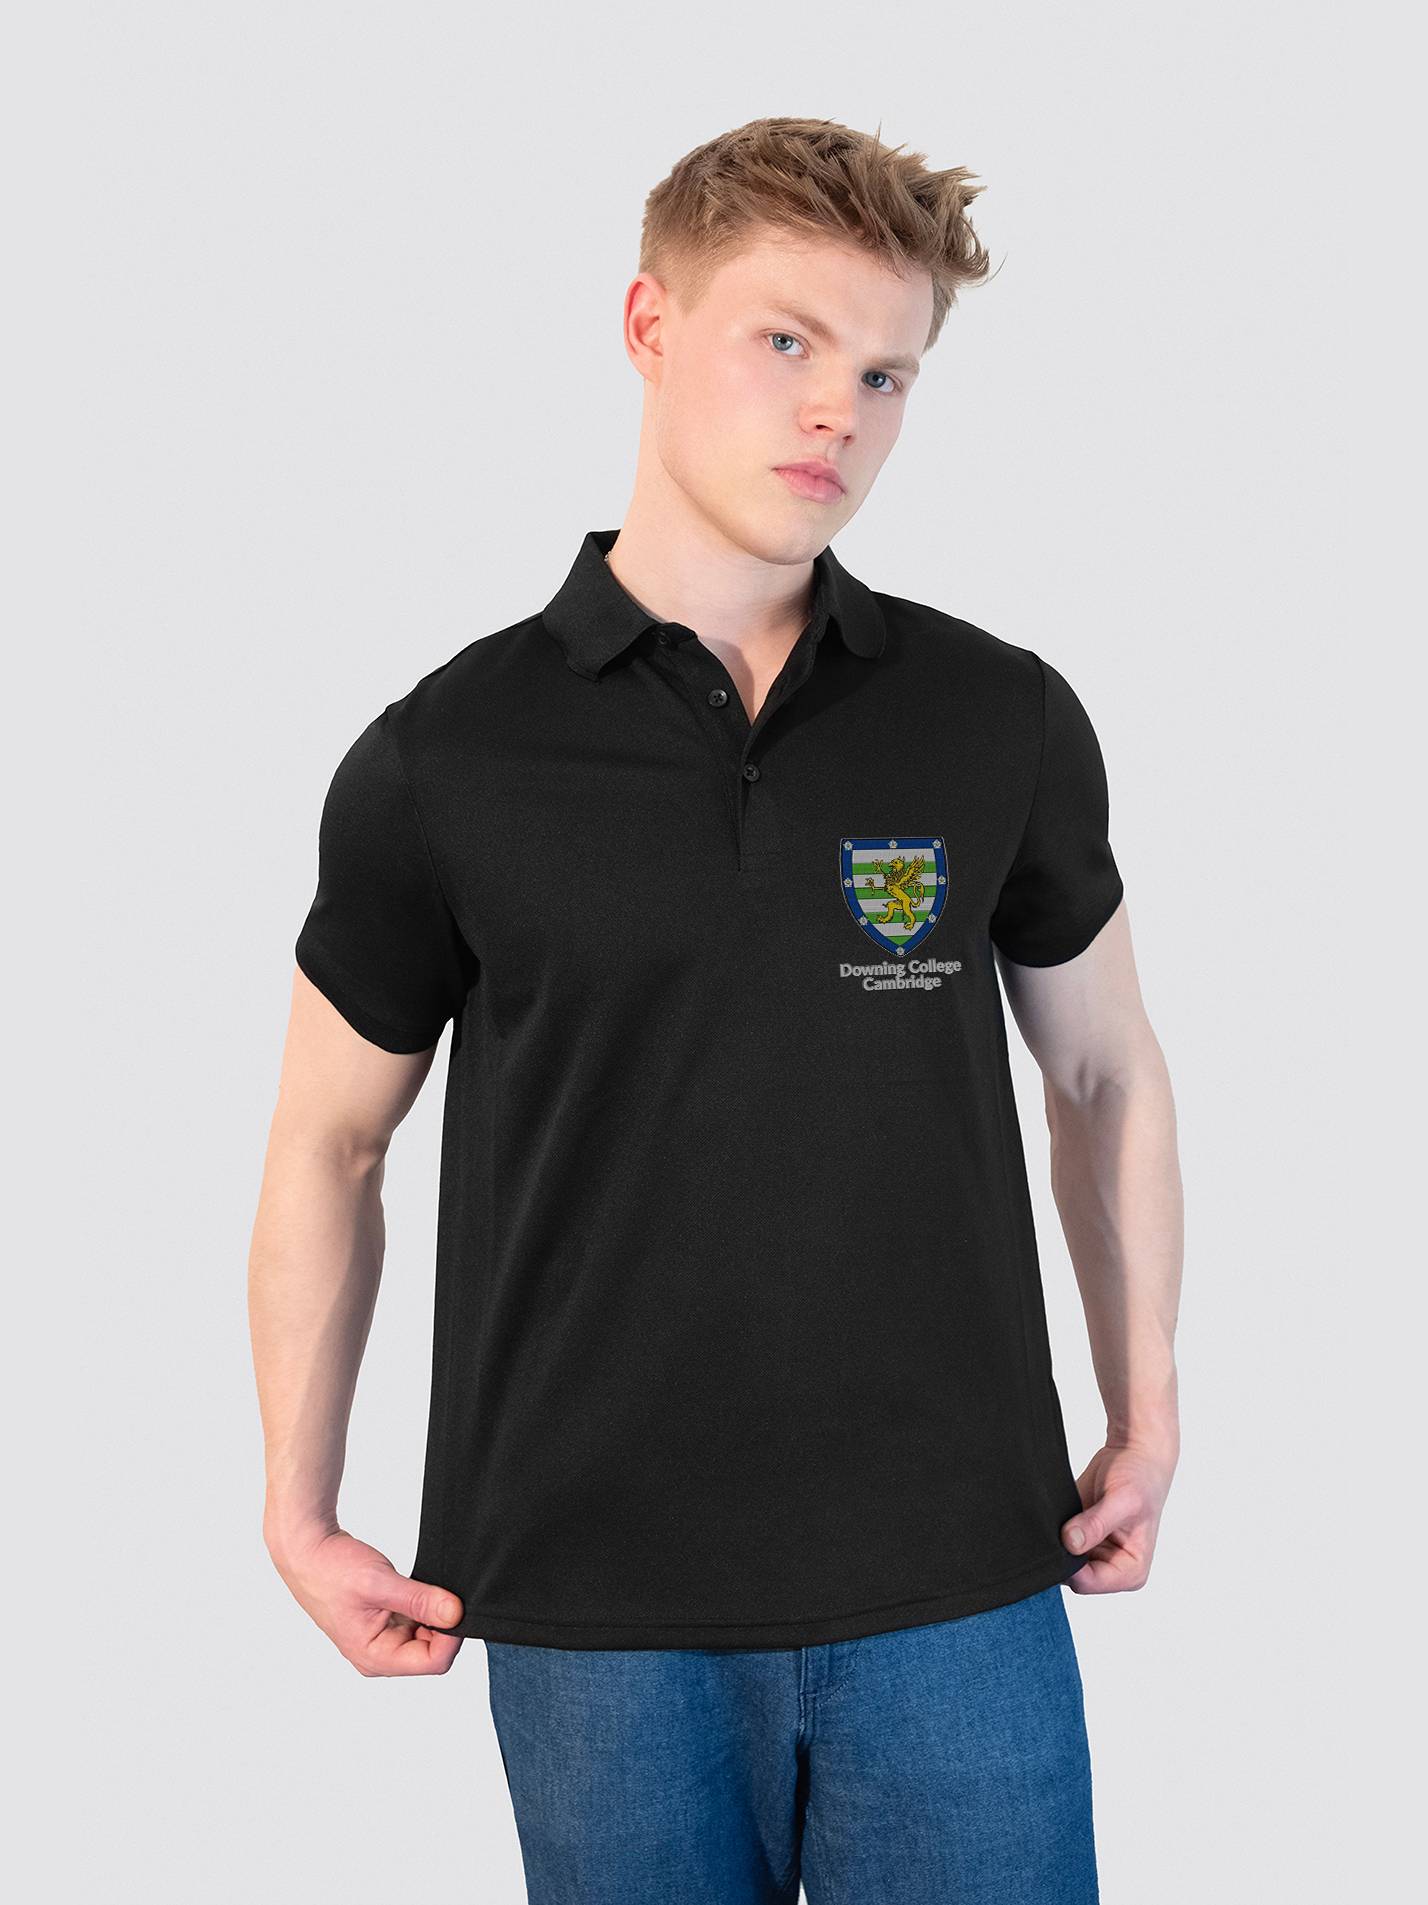 Downing College Cambridge JCR Sustainable Men's Polo Shirt